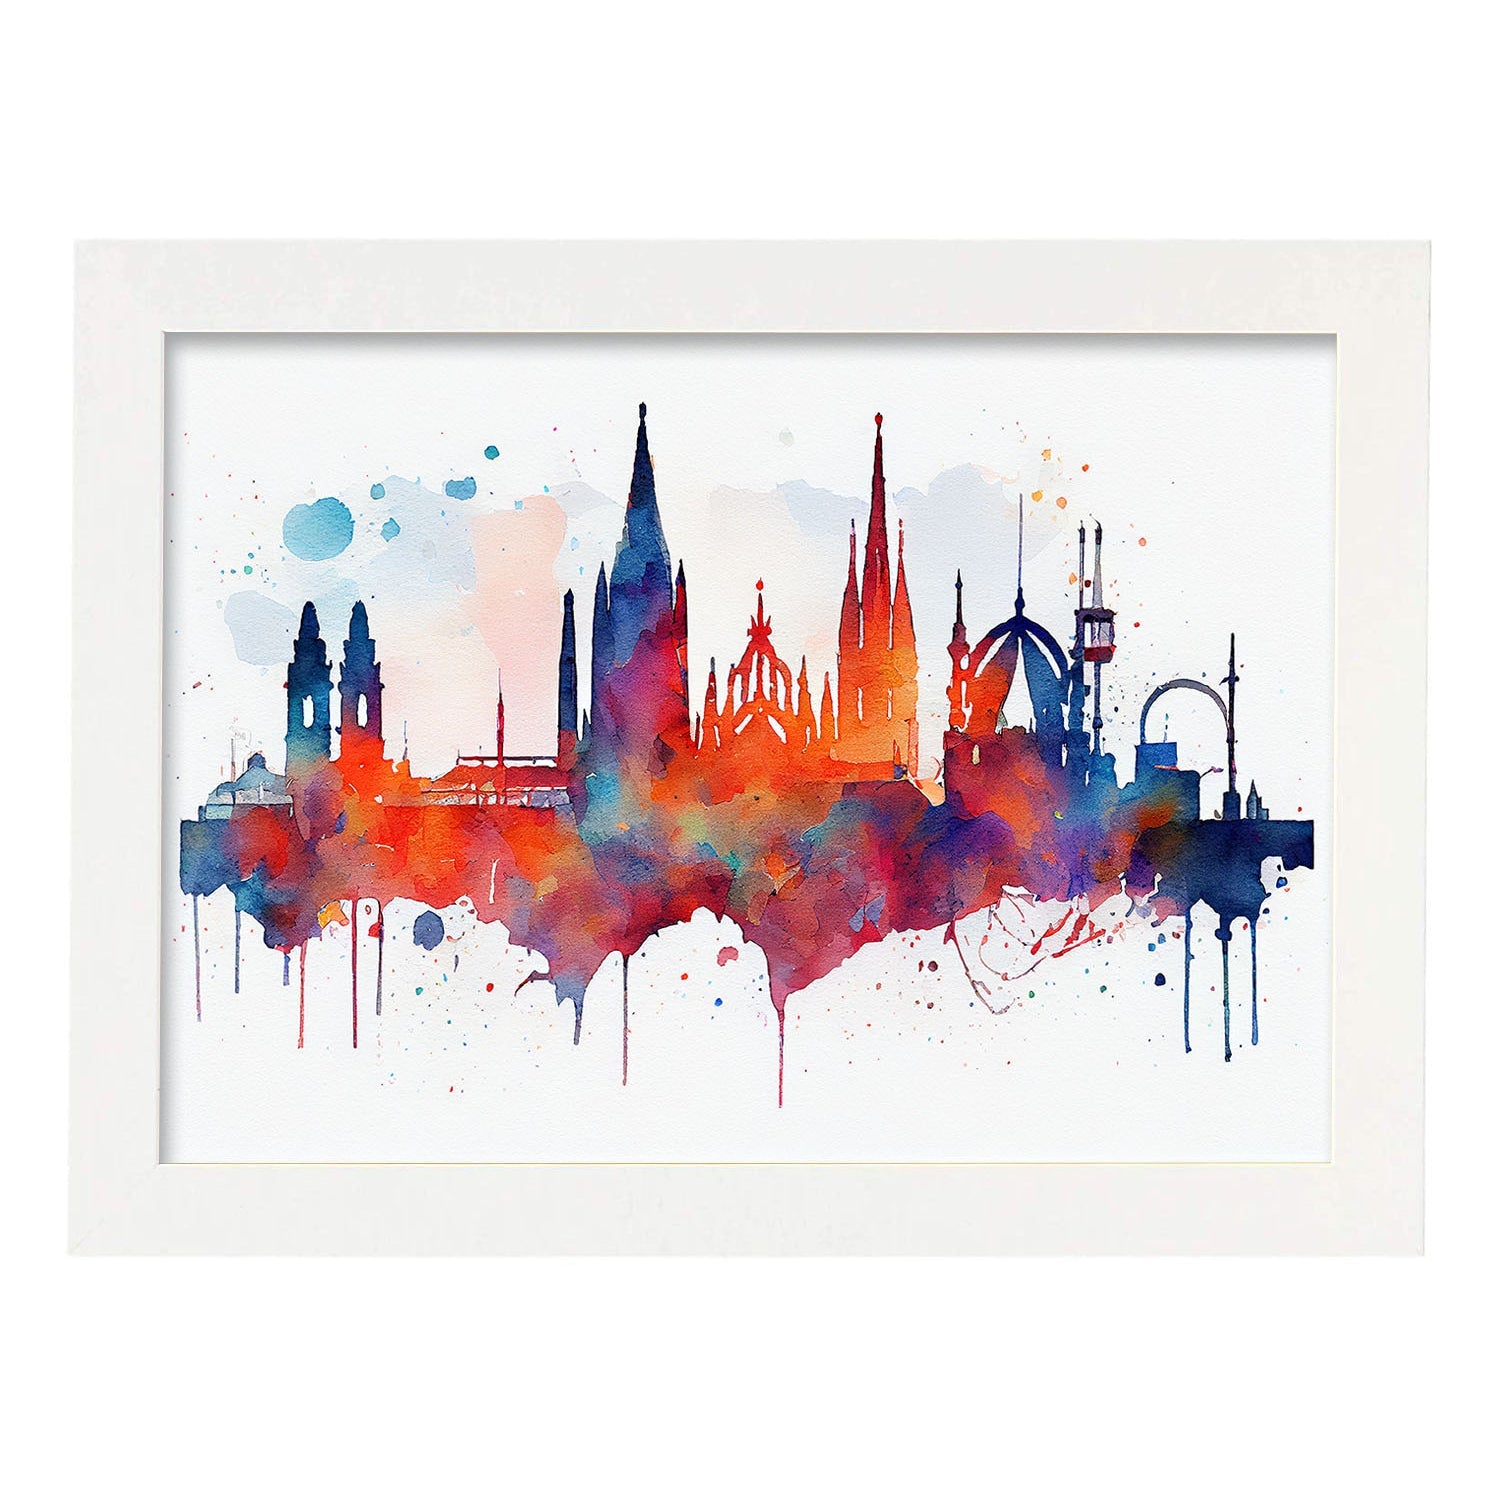 Nacnic watercolor of a skyline of the city of Barcelona_2. Aesthetic Wall Art Prints for Bedroom or Living Room Design.-Artwork-Nacnic-A4-Marco Blanco-Nacnic Estudio SL